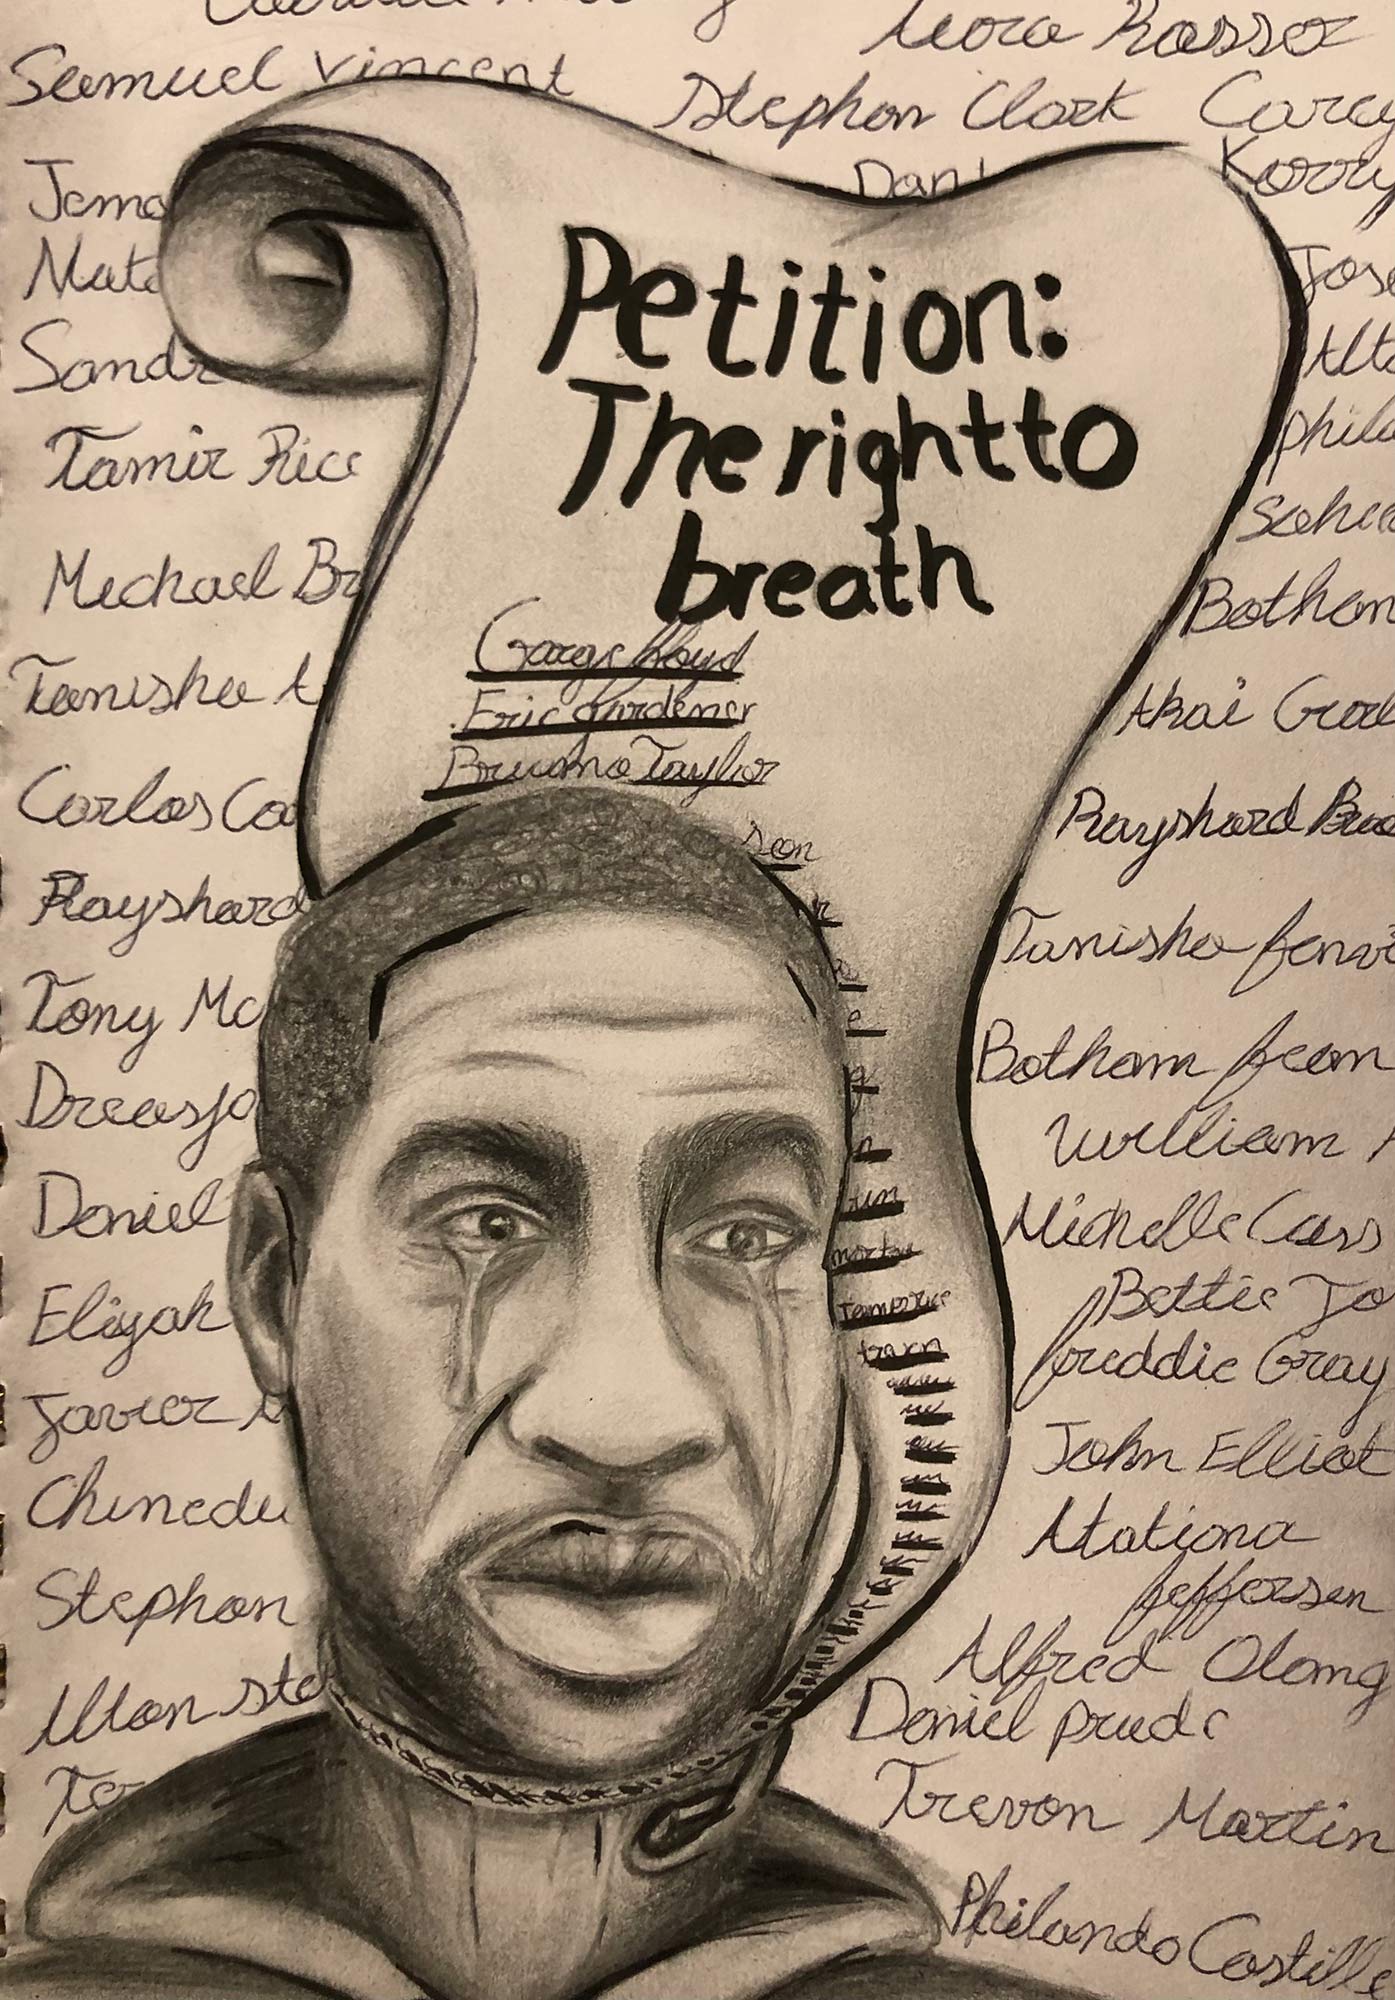 A drawing of George Floyd with a paper reading "Petition" The right to breath"